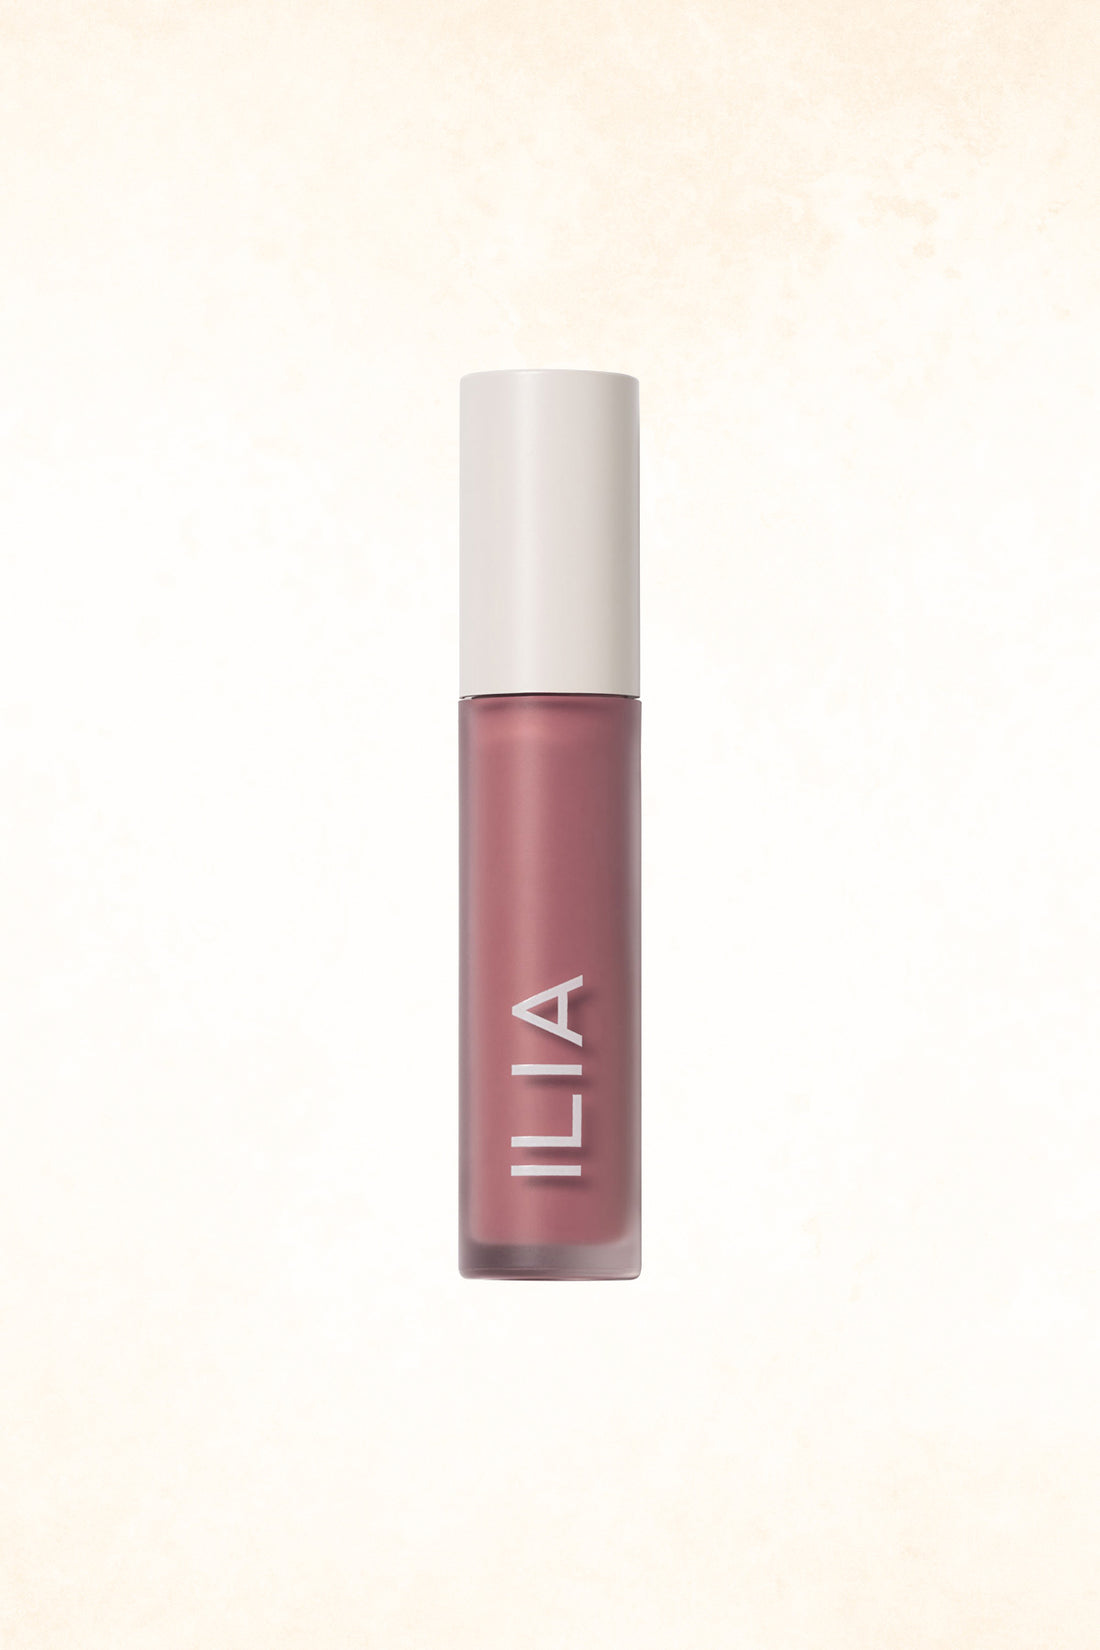 ILIA – Maybe Violet – Balmy Gloss Tinted Lip Oil